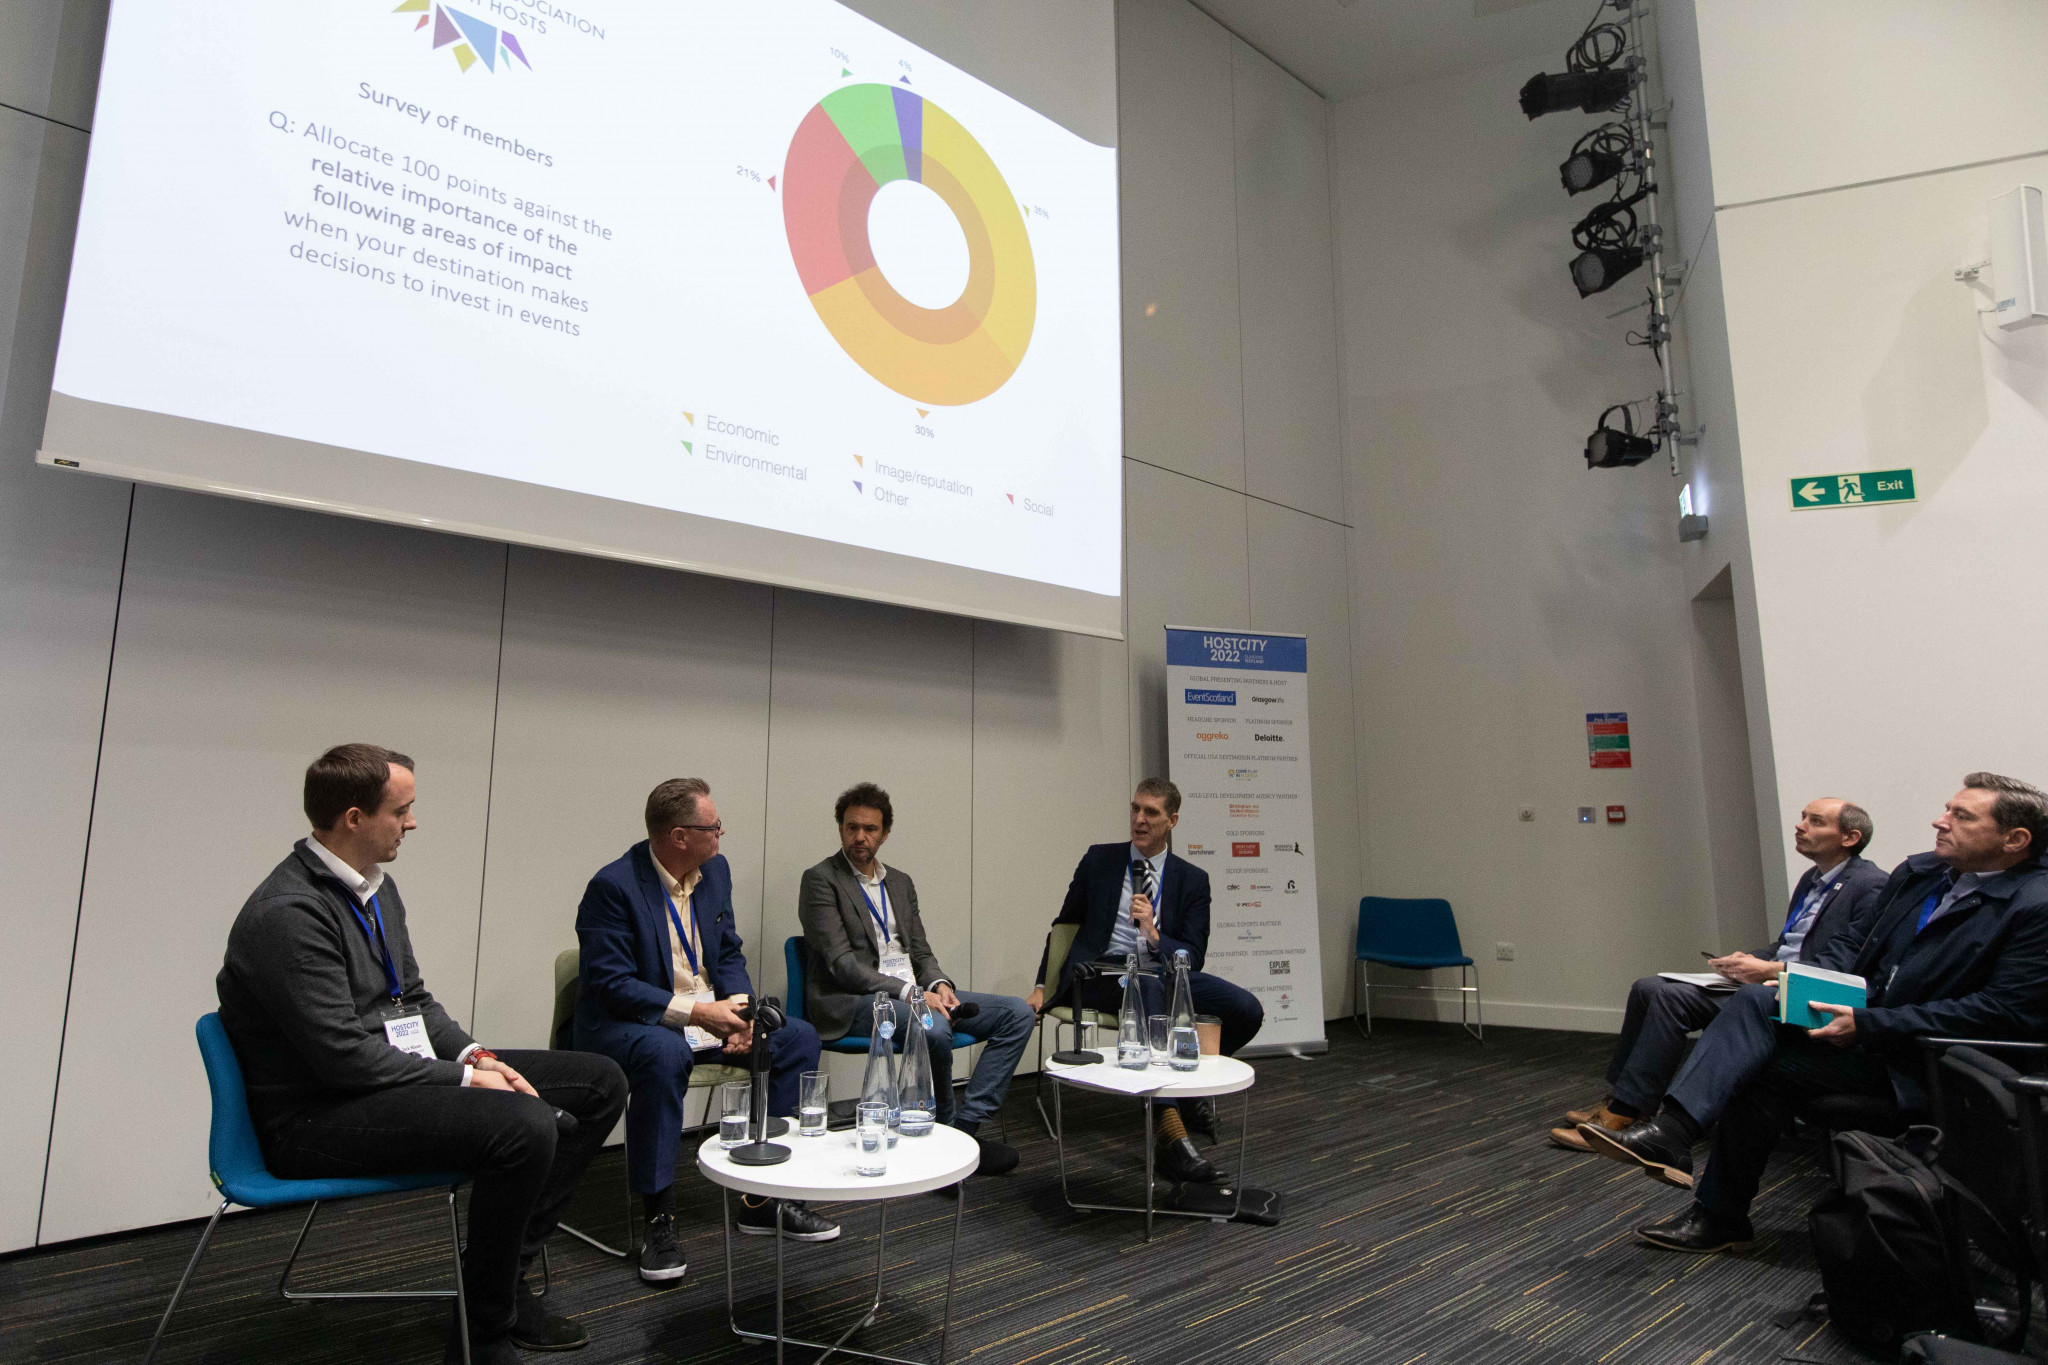 The benefits of hosting events were discussed by the penultimate panel at the conference ©Rob Lindblade